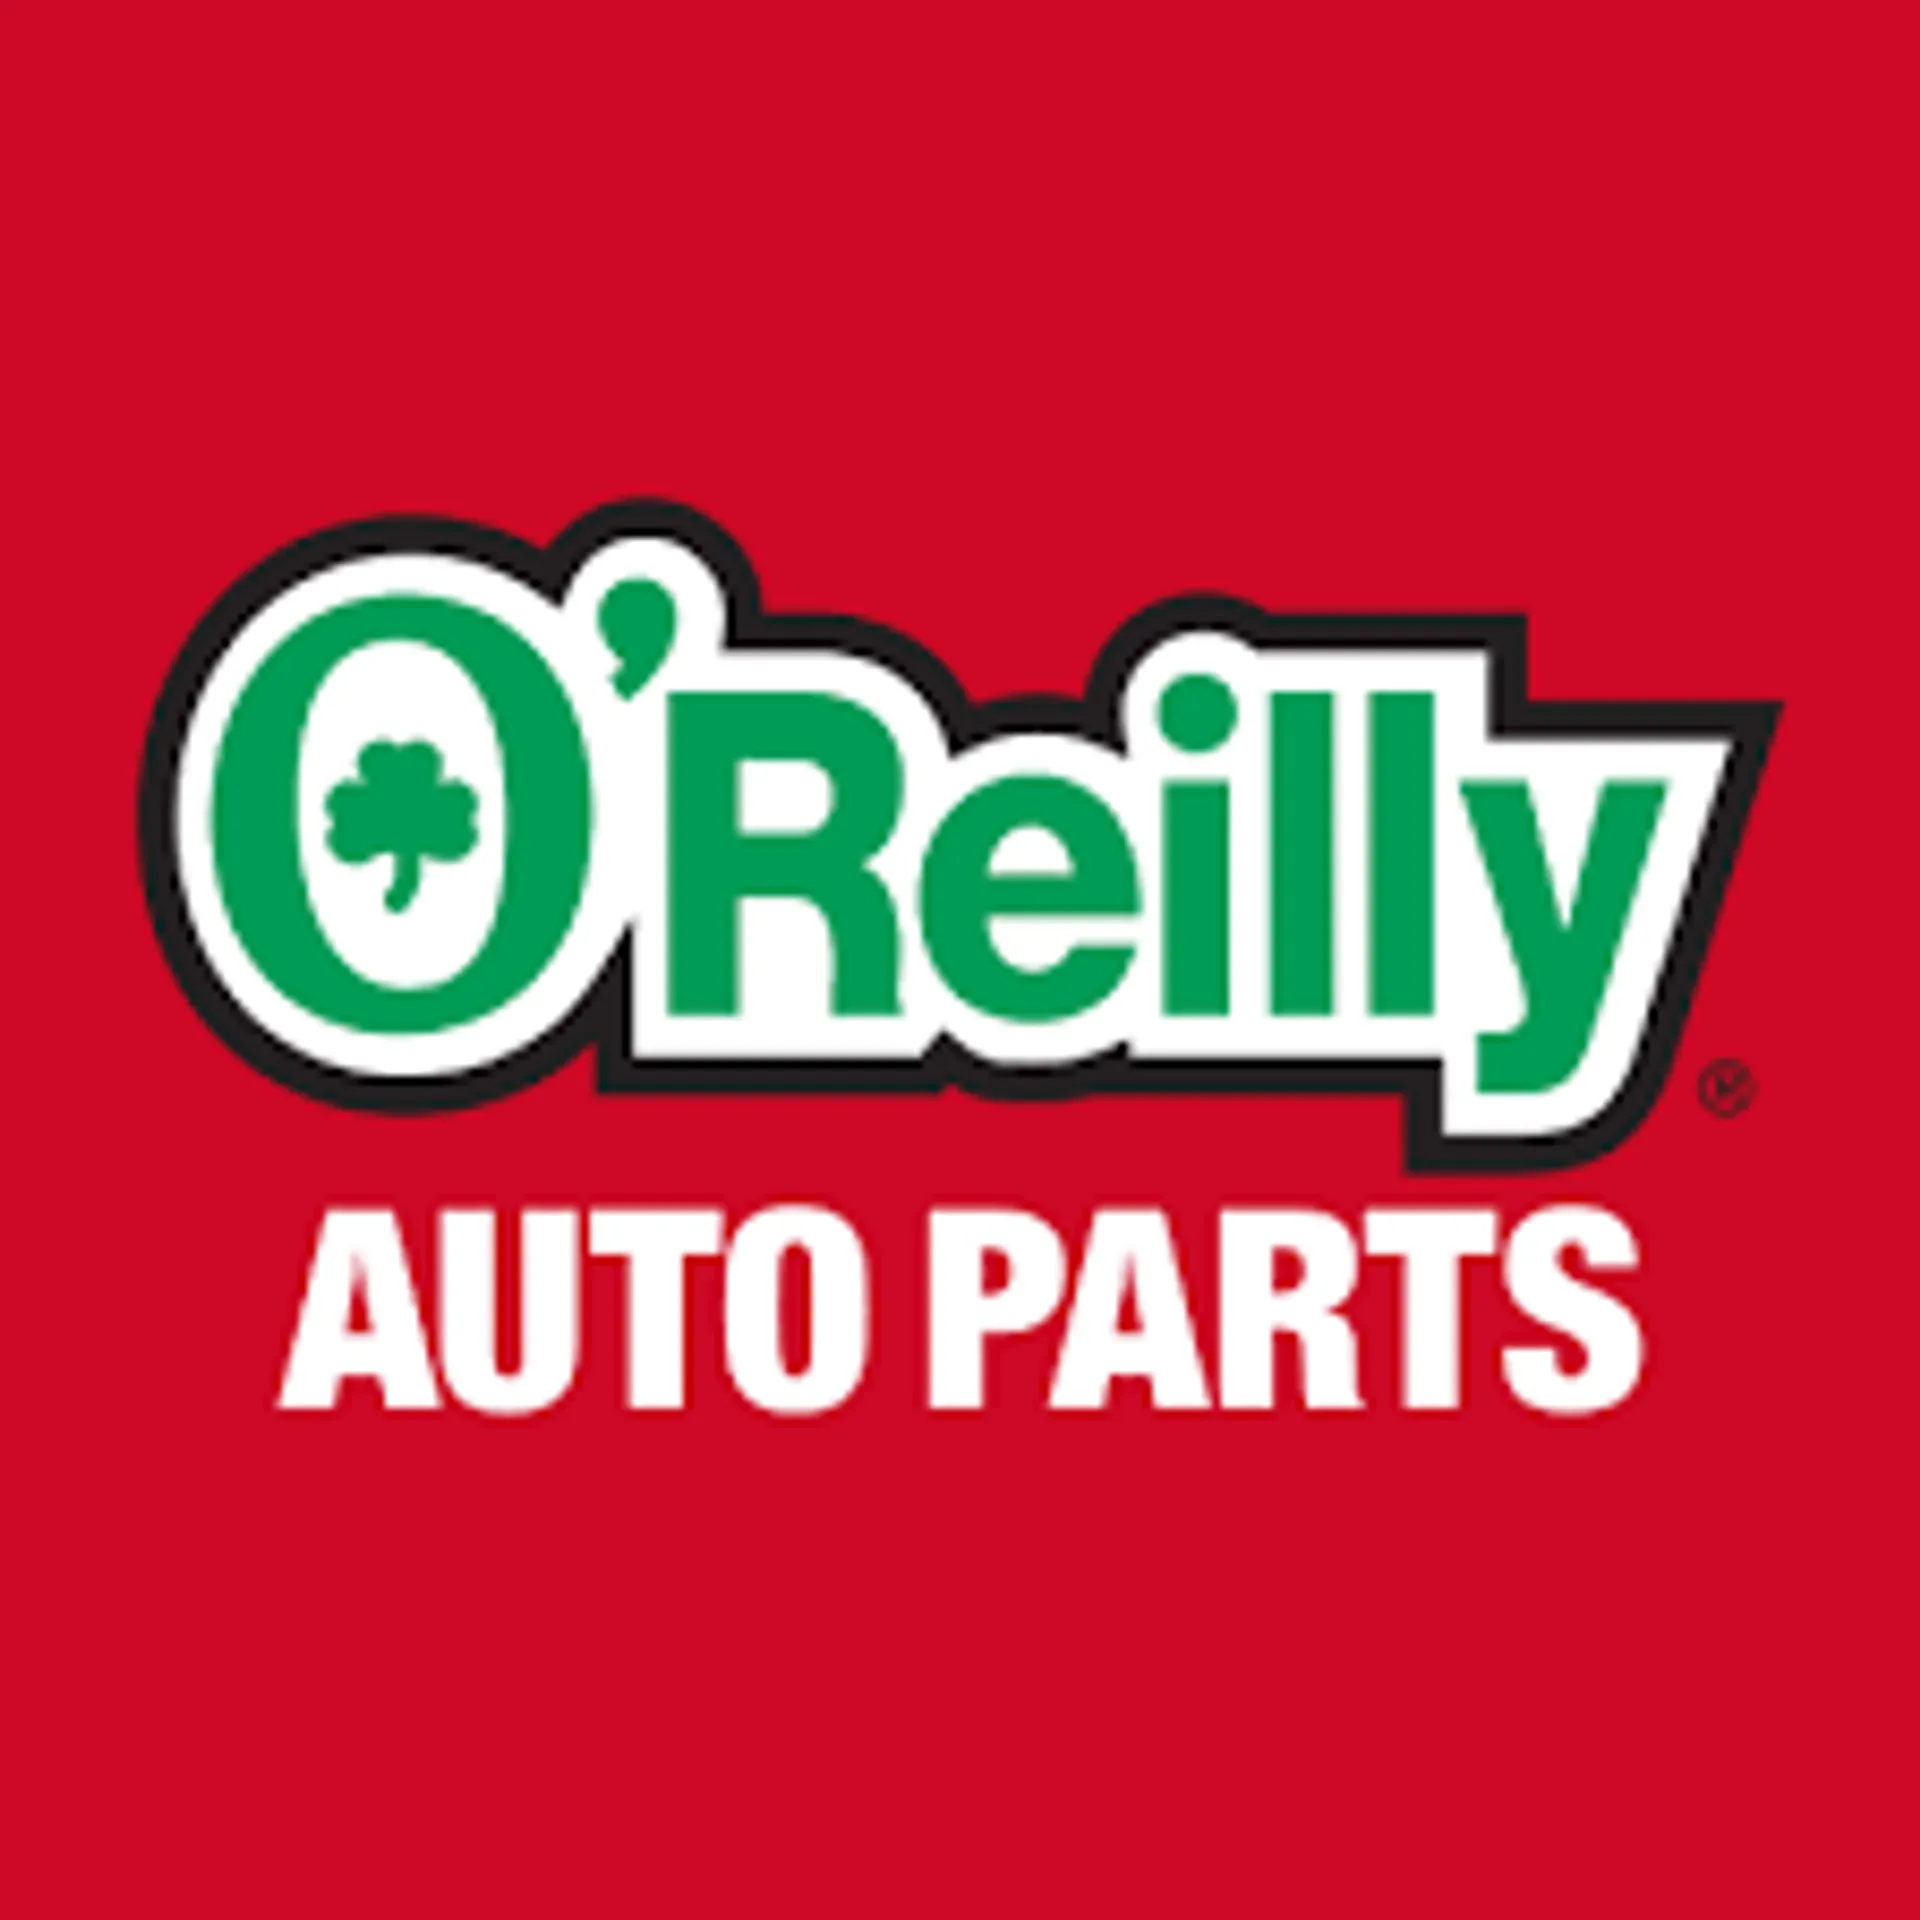 O'Reilly Auto Parts Local Connections™